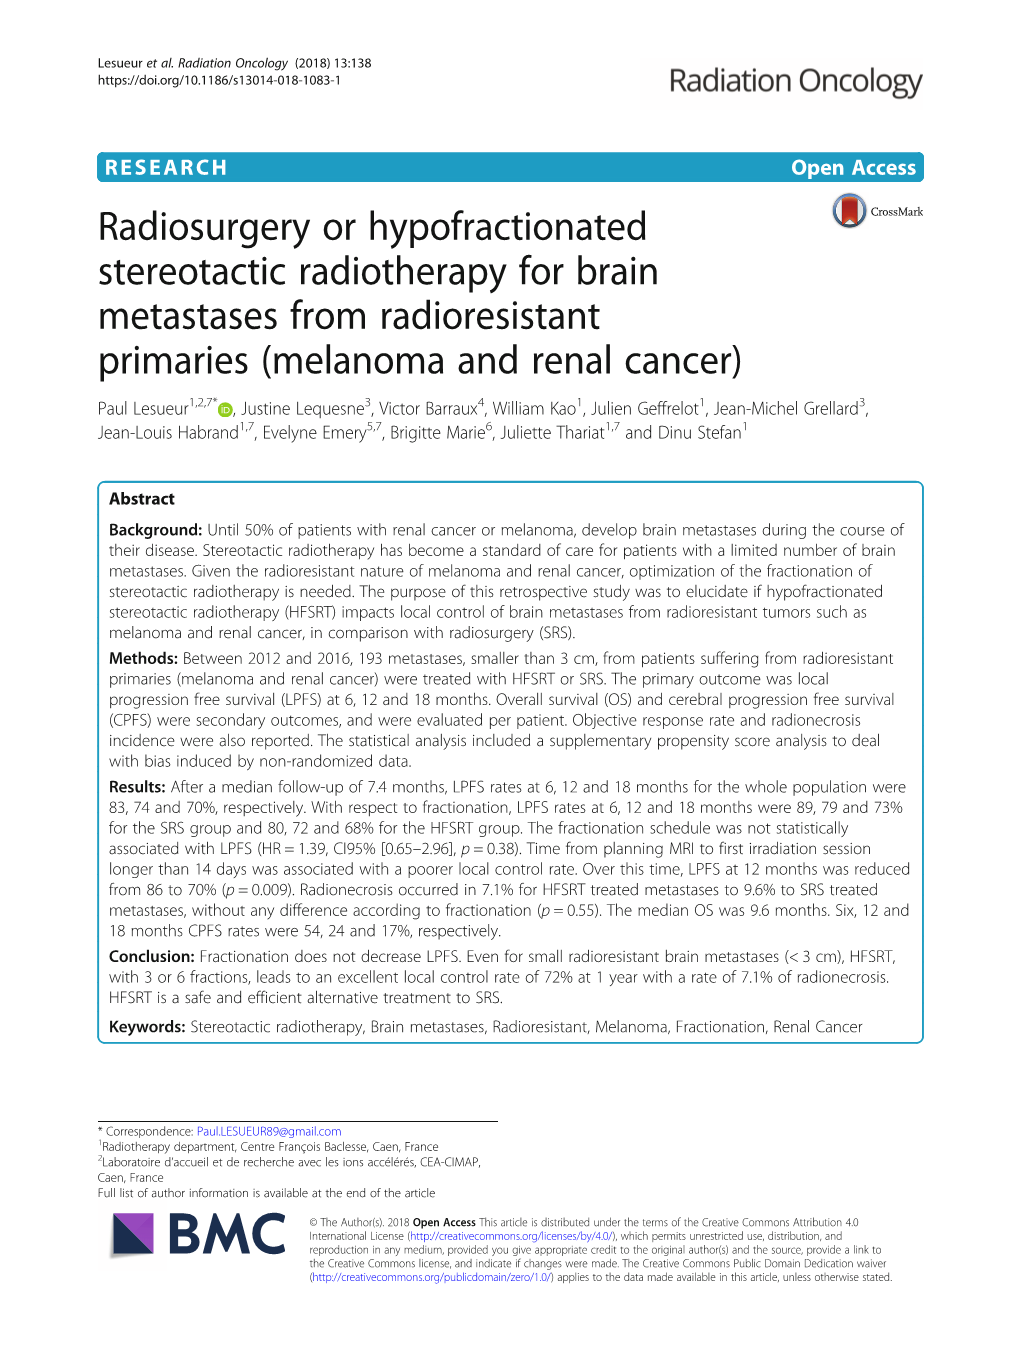 Radiosurgery Or Hypofractionated Stereotactic Radiotherapy for Brain Metastases from Radioresistant Primaries (Melanoma and Rena